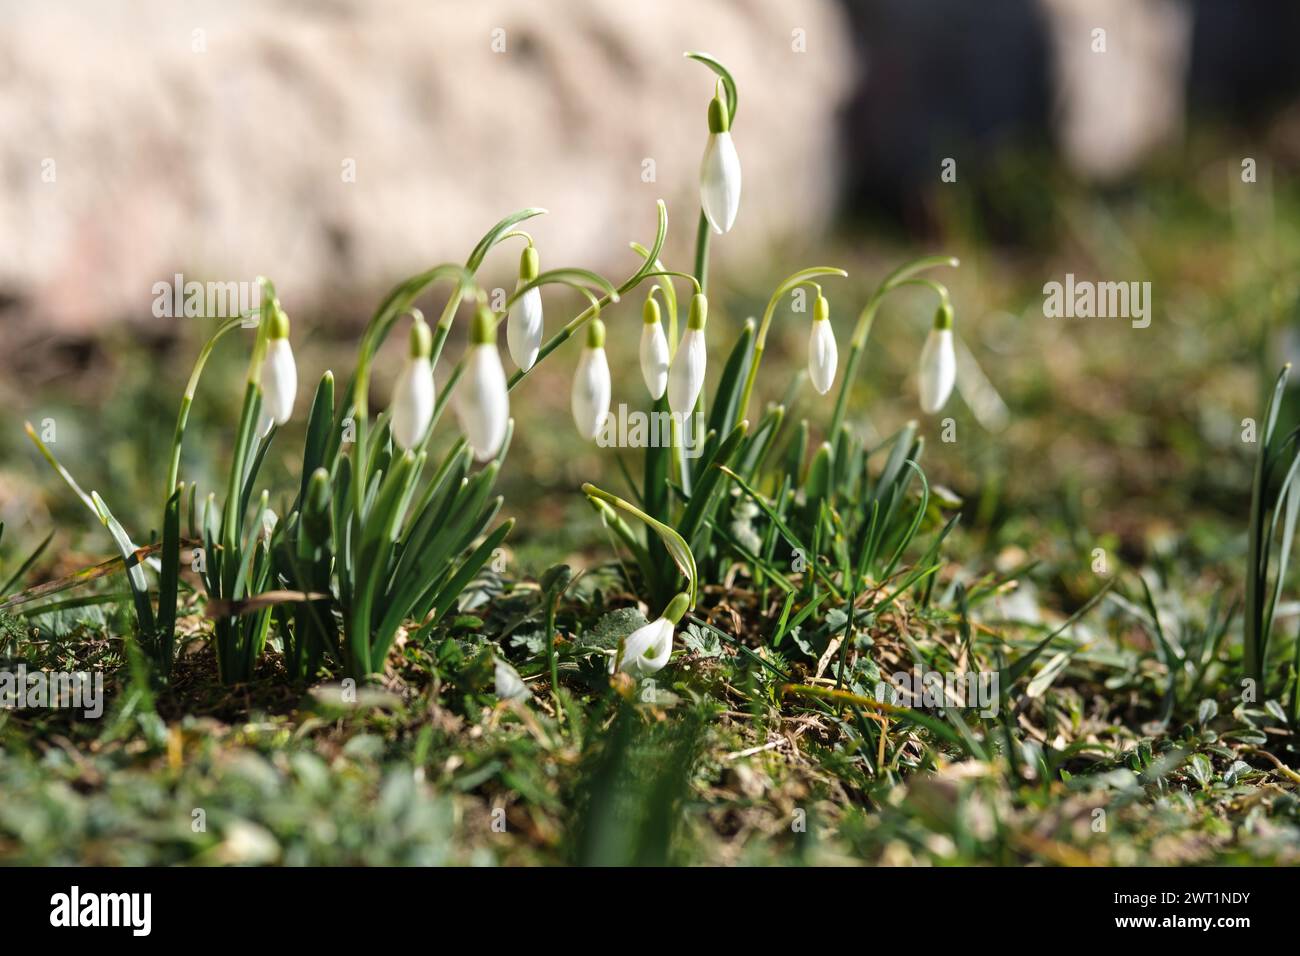 In Latvia's springtime embrace, snowdrops carpet the earth with delicate hues Stock Photo